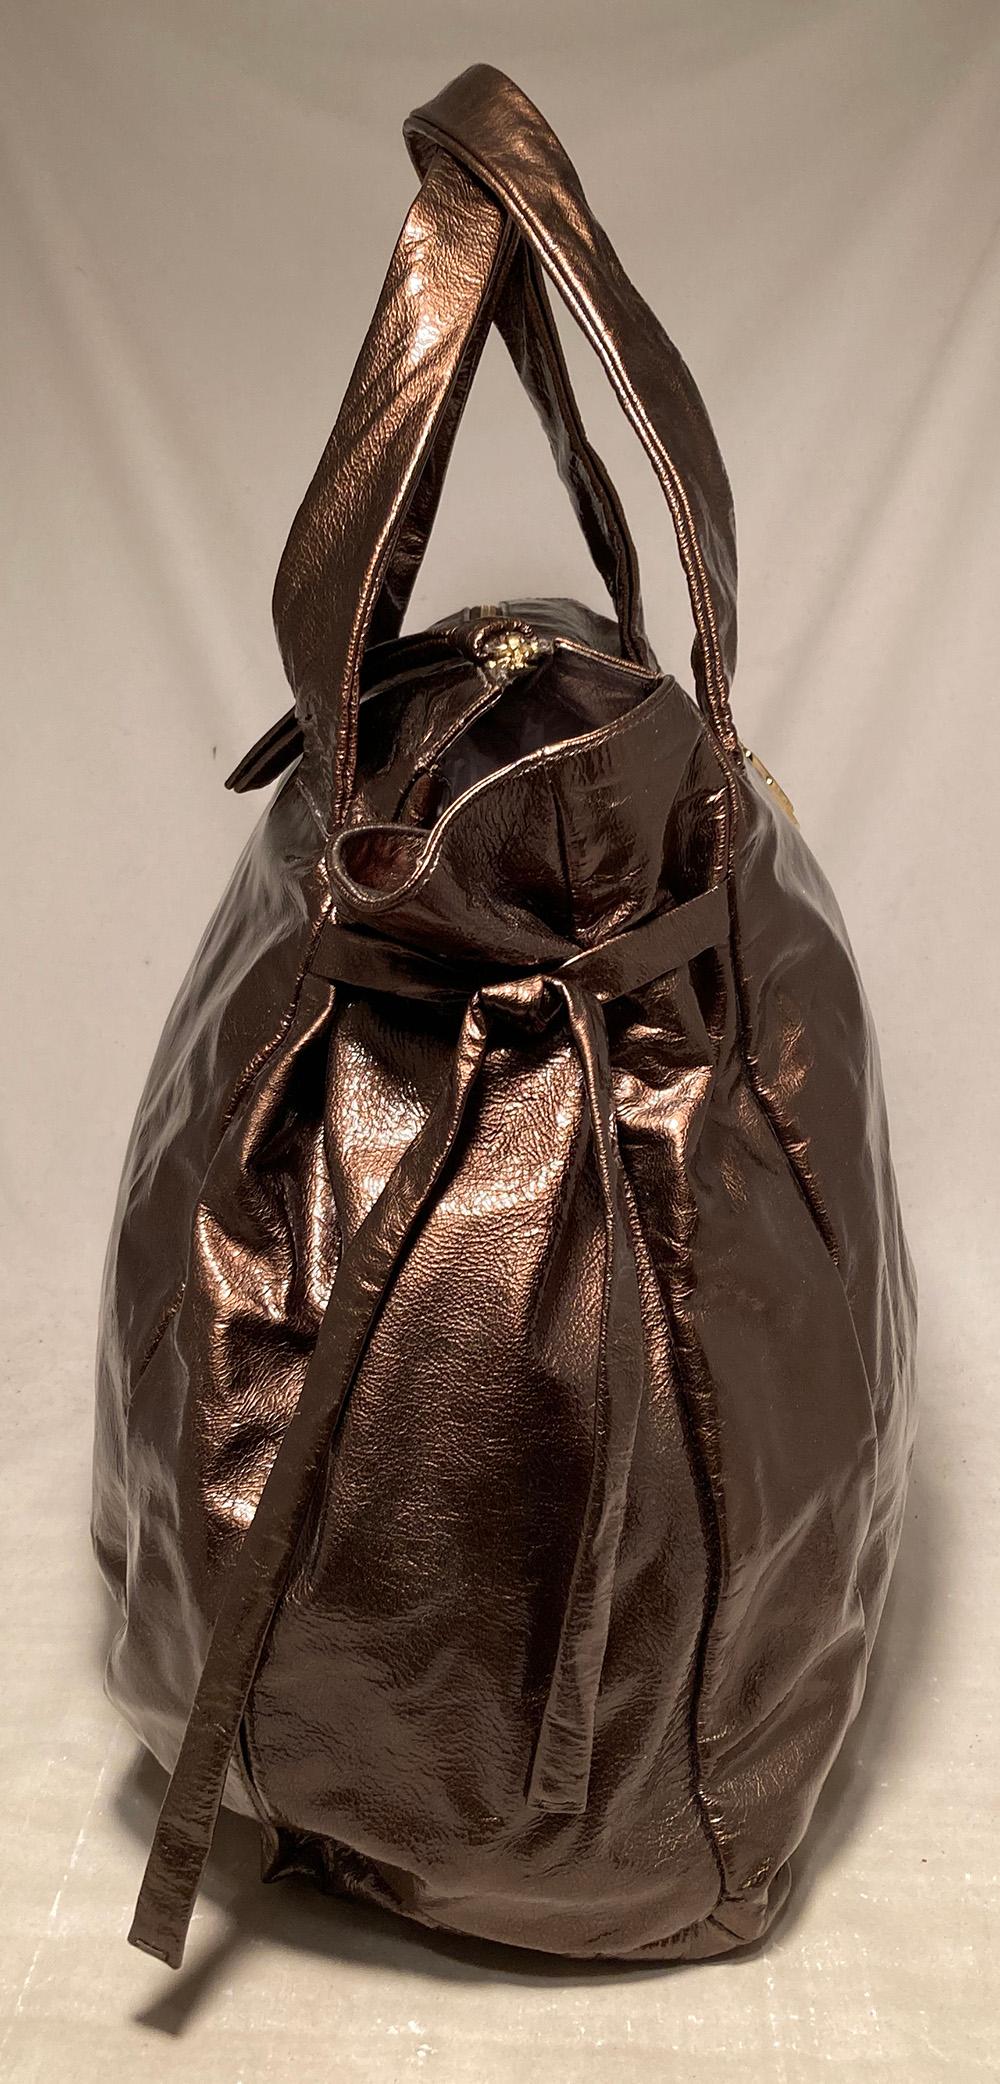 Gucci Bronze Patent Leather Hysteria Bag in excellent condition. Metallic bronze patent leather exterior trimmed with gold hardware, double top handles, front round Gucci medallion in gold, unique side ties and coveted Hysteria design. . Top zipper